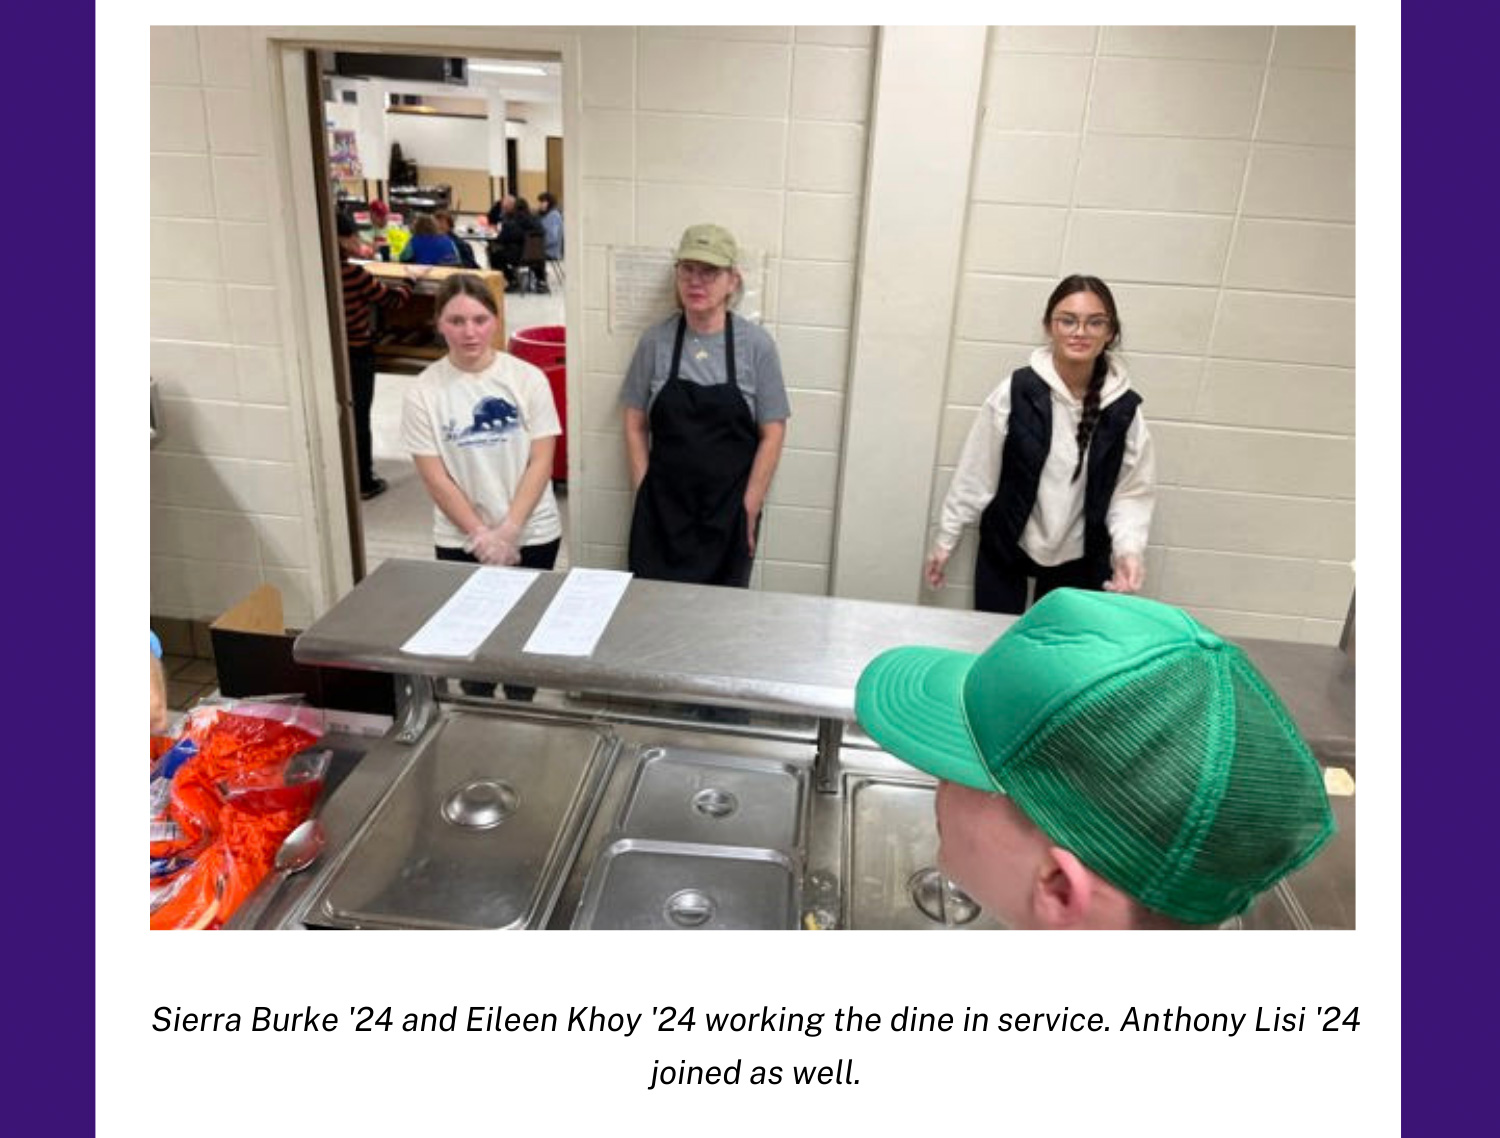 Christian Brothers Academy in Syracuse, NY students working the dine in service.